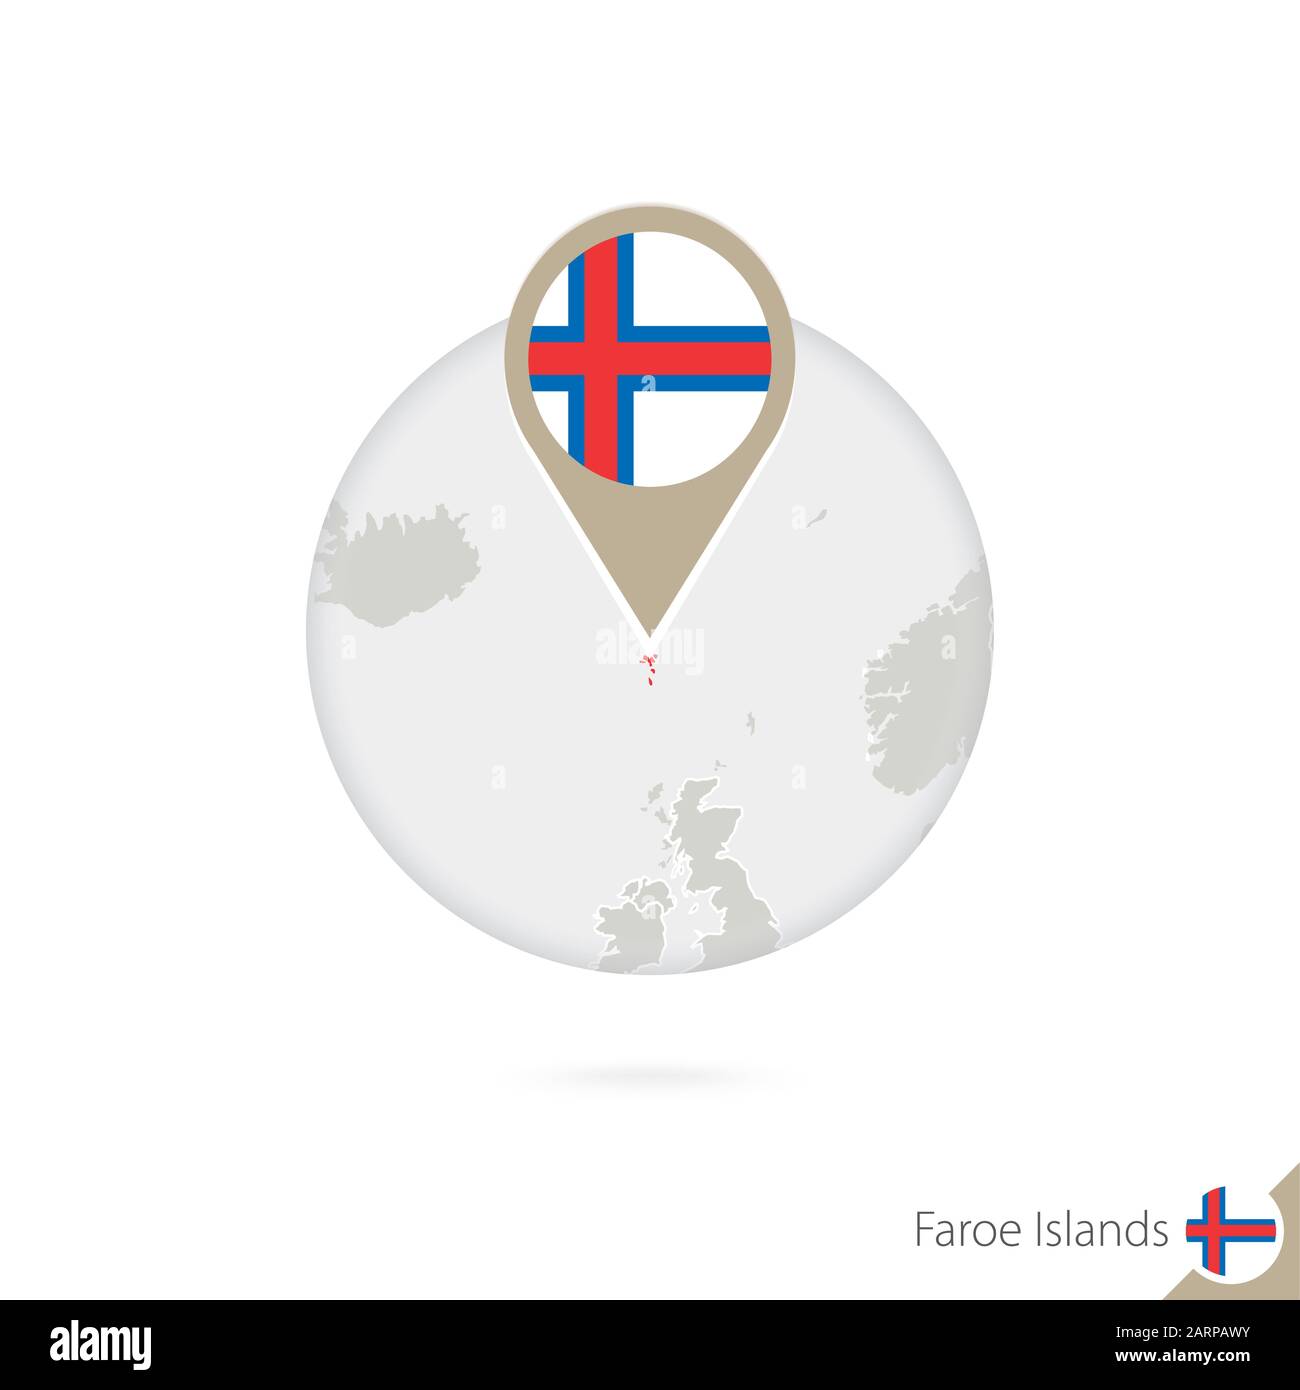 Faroe Islands map and flag in circle. Map of Faroe Islands, Faroe Islands flag pin. Map of Faroe Islands in the style of the globe. Vector Illustratio Stock Vector